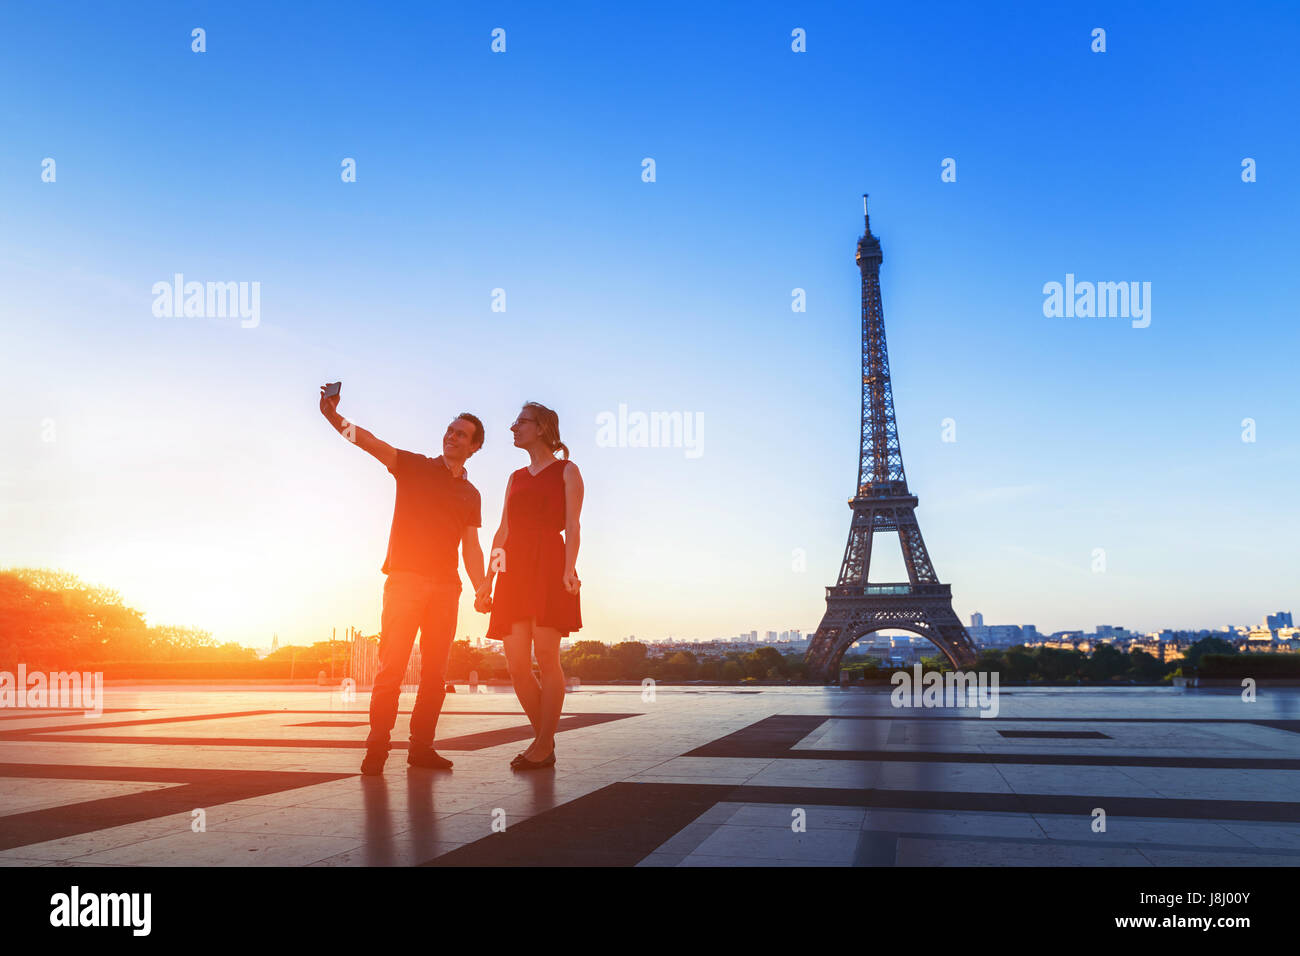 Silhouette of a loving couple taking selfie portrait photo in front of Eiffel Tower, Trocadero, Paris, France Stock Photo